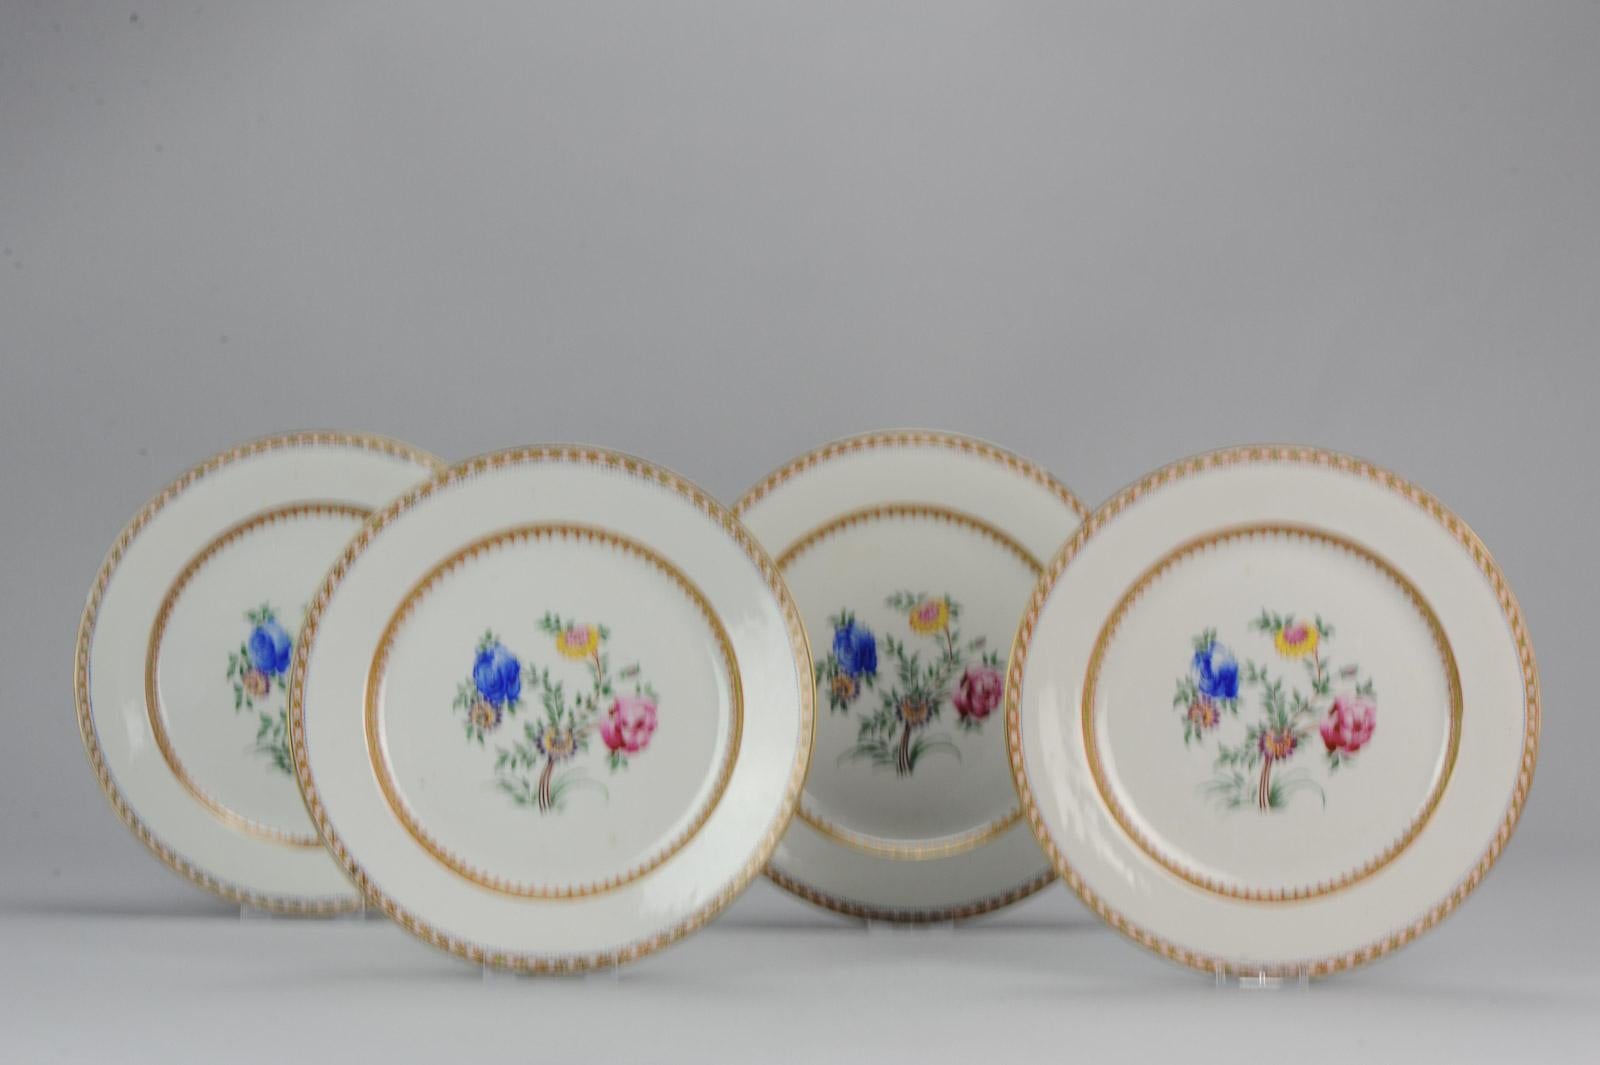 A very nicely decorated set of dinner plates plate. Very rare type of decoration. Dating to circa 1760
Condition

Overall condition B (Good Used). 1 with hairline, 1 with some frits and warping, 1 with a chip, 1 with hairline in base. Size